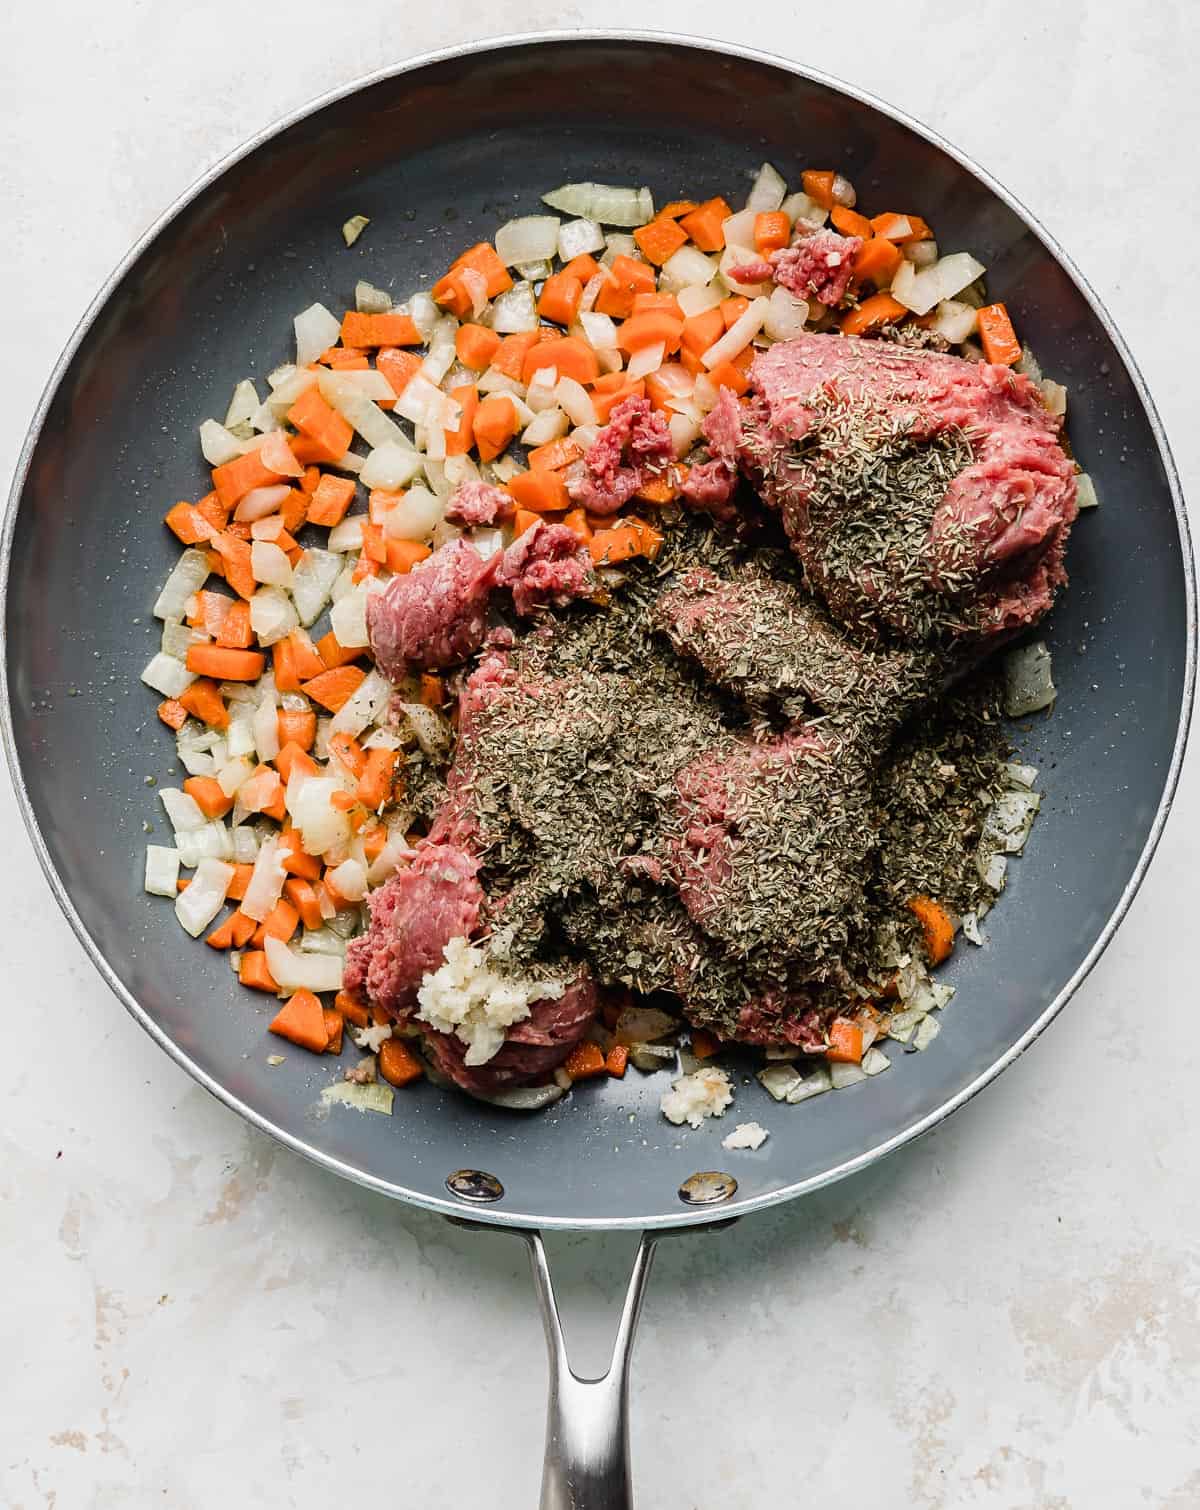 A gray skillet with cooked carrots and onions topped with raw ground beef and seasonings.